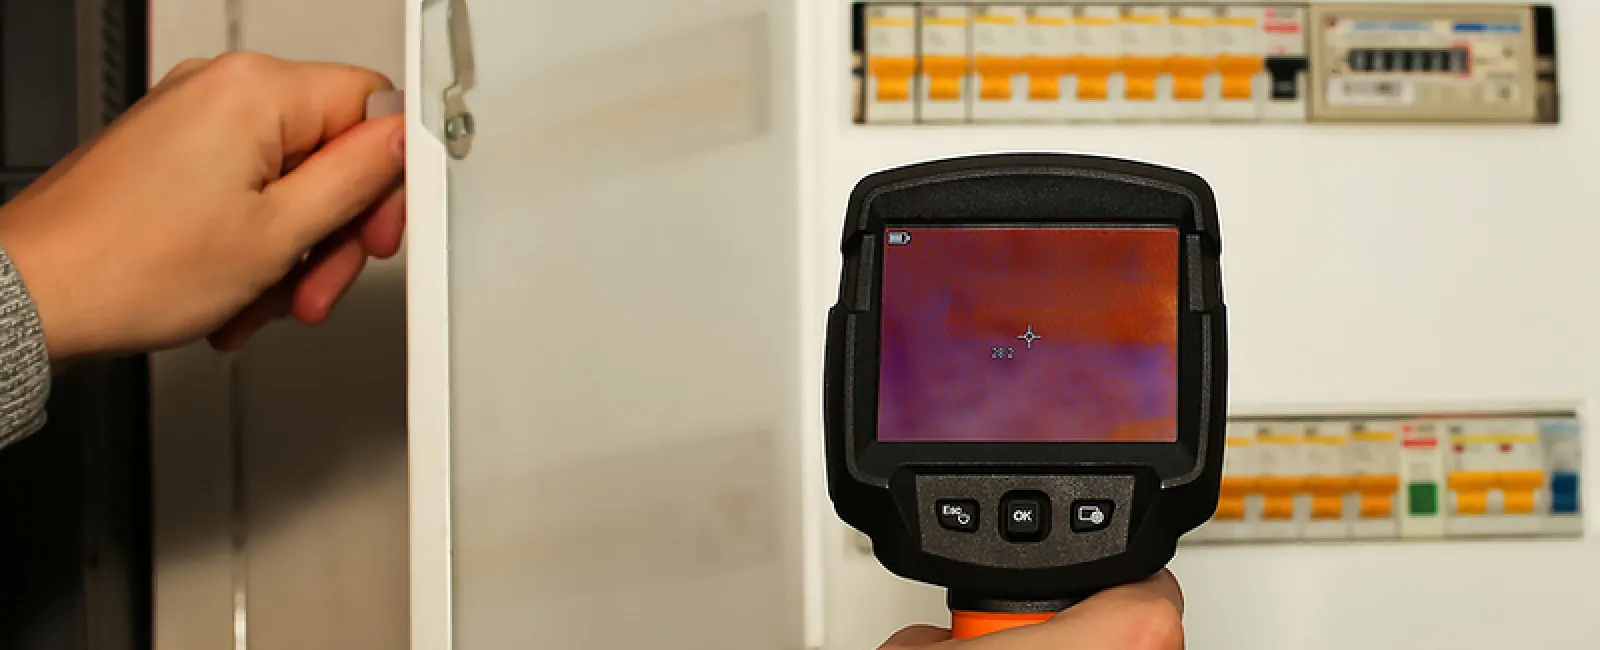 Benefits of Thermal Imaging